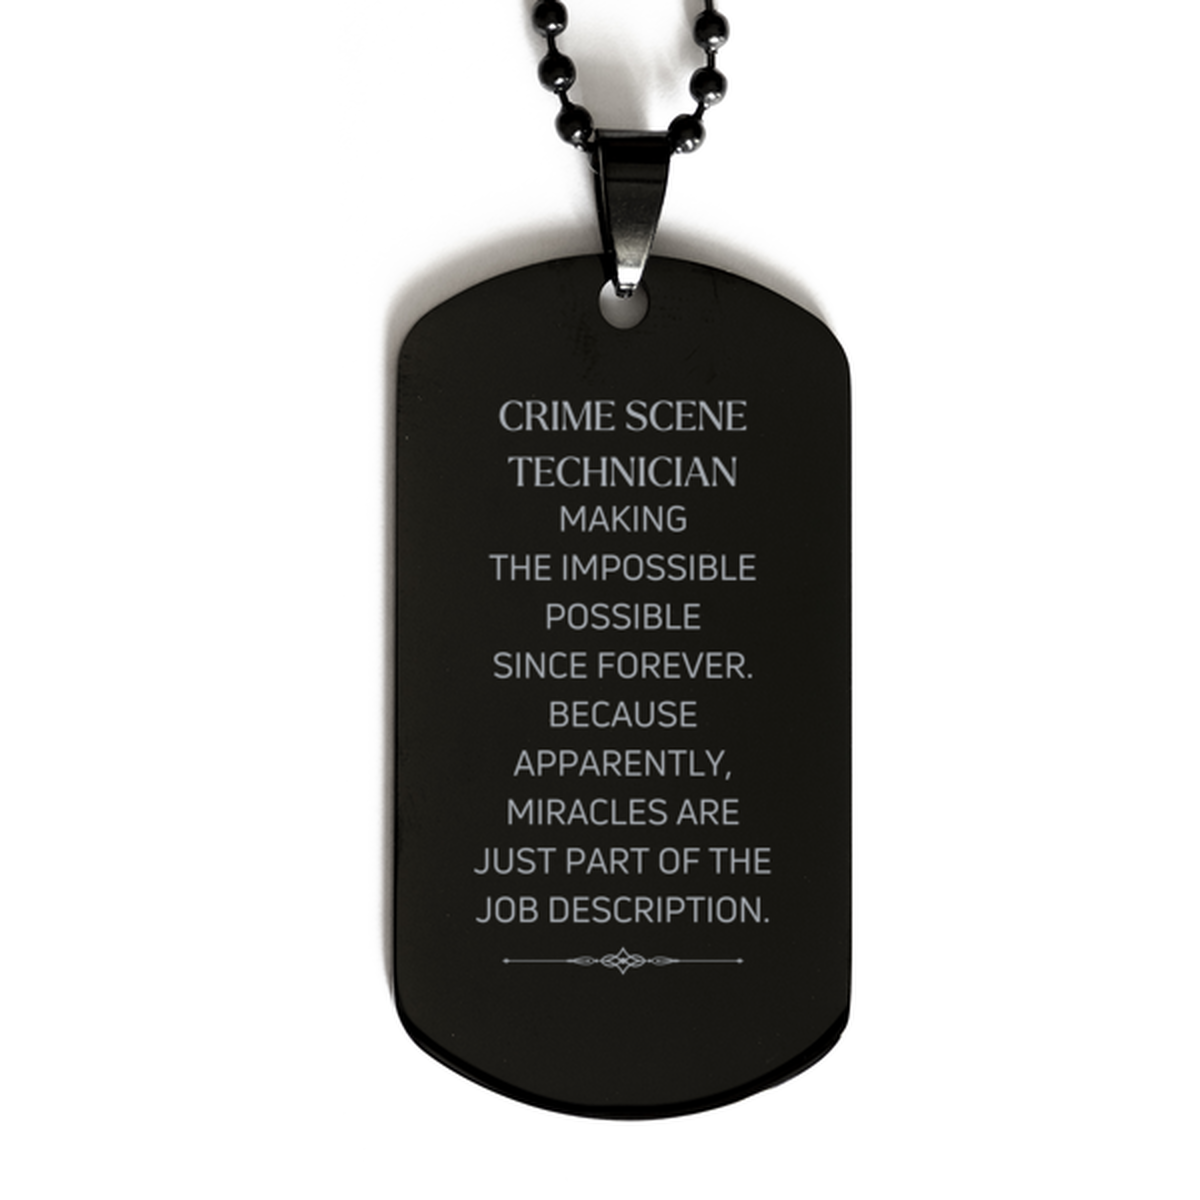 Funny Crime Scene Technician Gifts, Miracles are just part of the job description, Inspirational Birthday Black Dog Tag For Crime Scene Technician, Men, Women, Coworkers, Friends, Boss